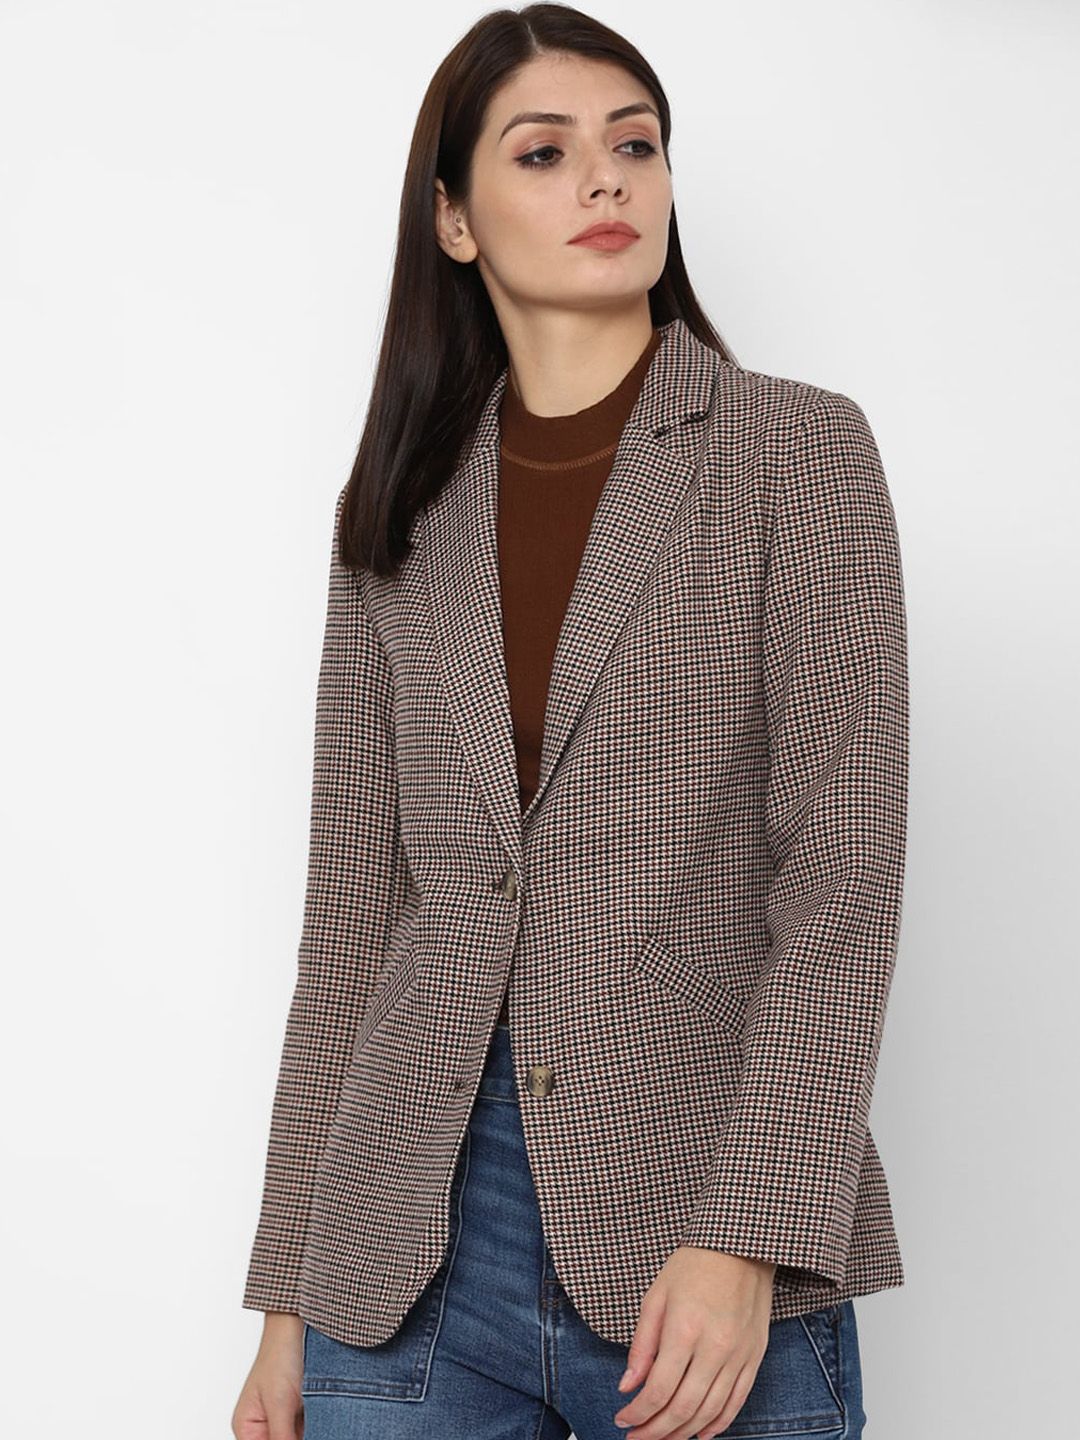 AMERICAN EAGLE OUTFITTERS Women Brown Black Tailored Jacket Price in India